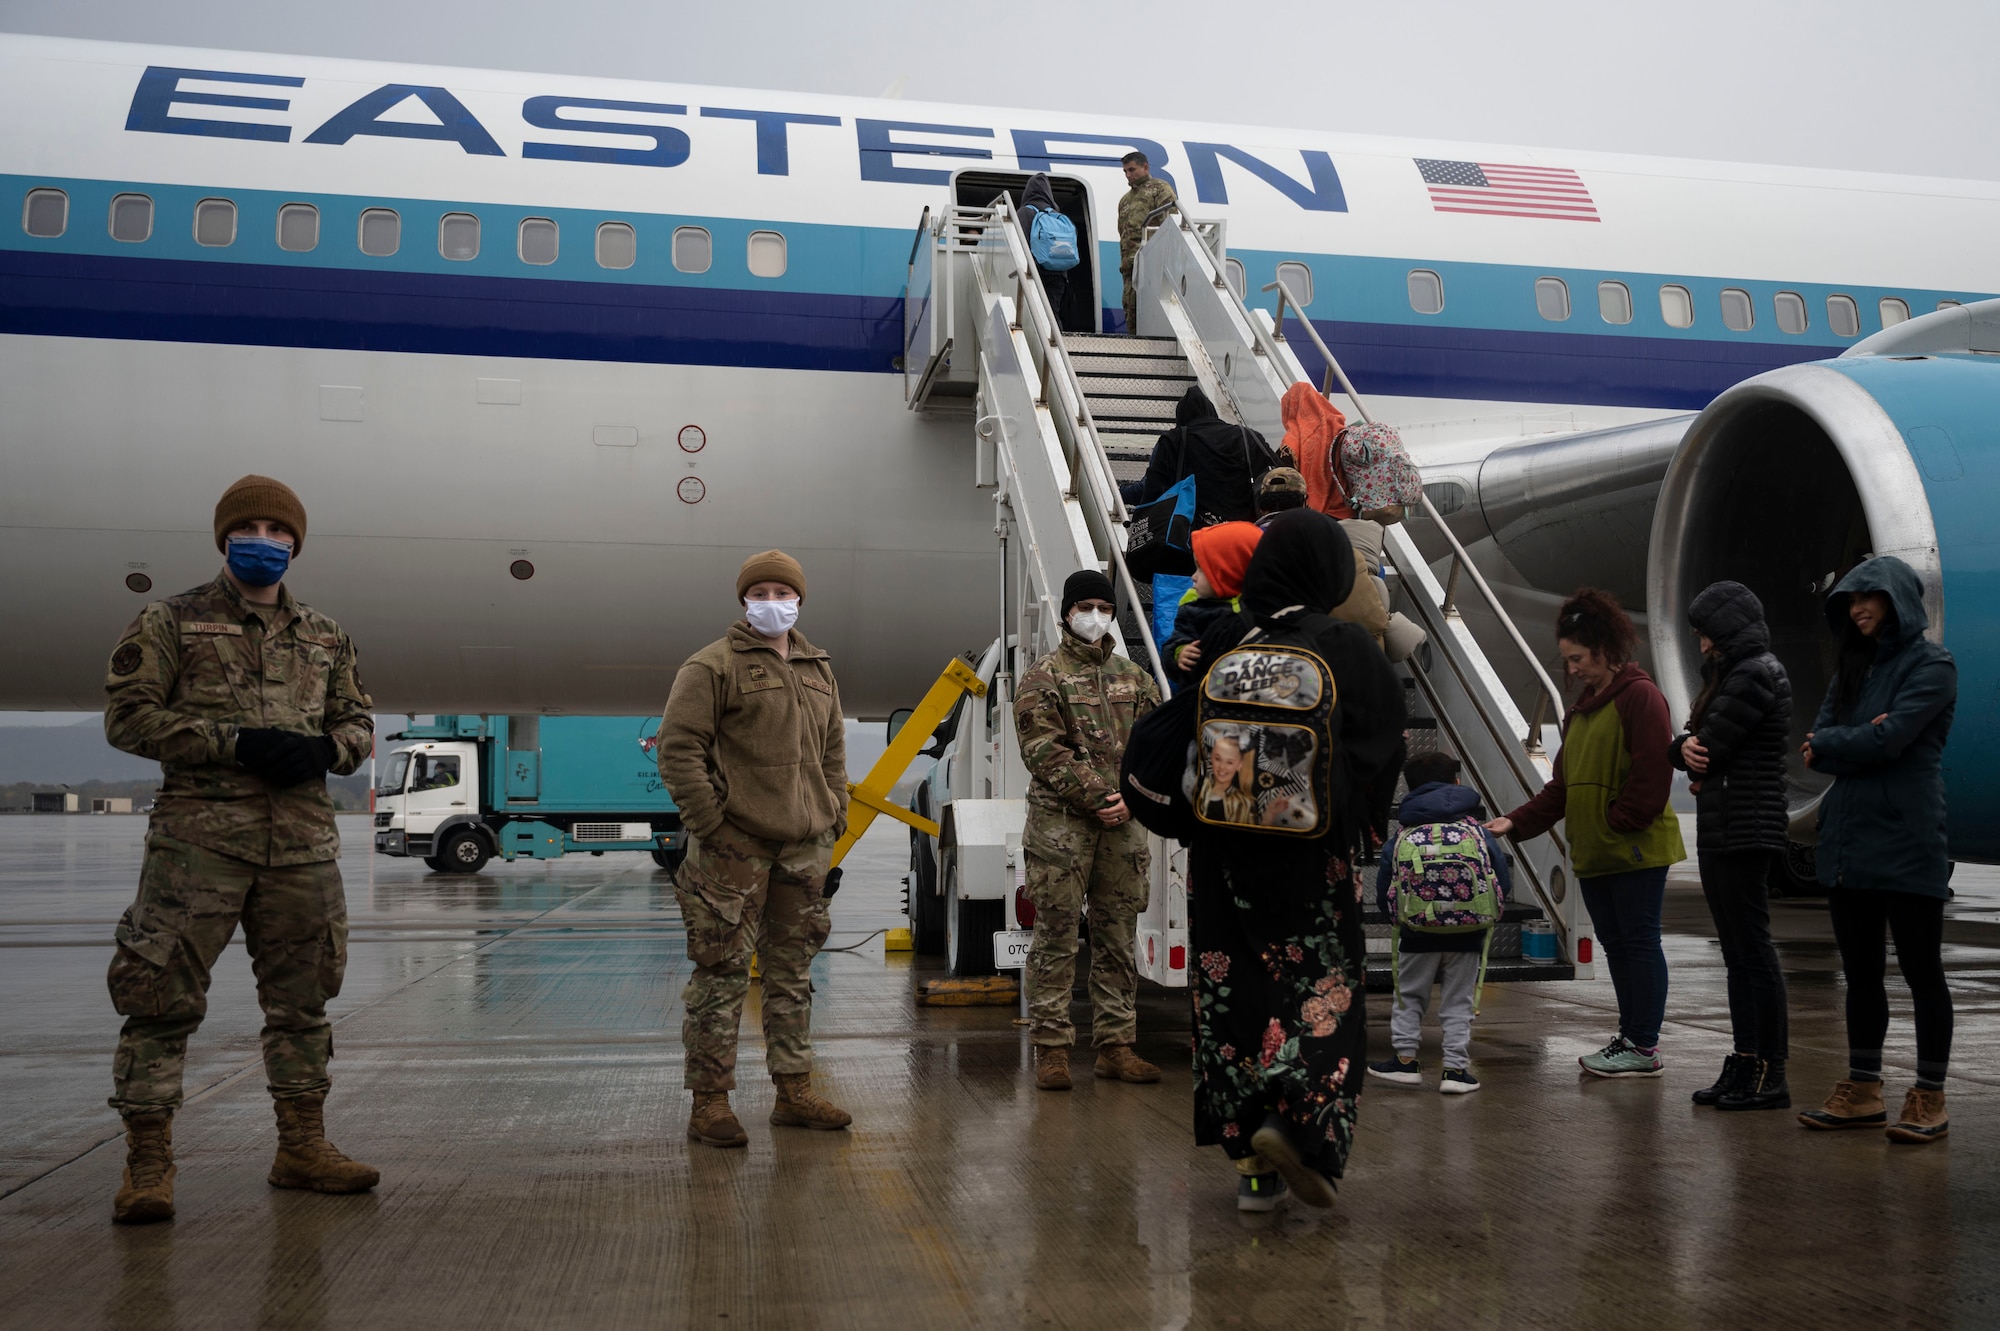 Afghan evacuees board the final flight to the United States from Ramstein Air Base, Germany, Oct. 30, 2021. Most evacuees departed by Oct. 17, but a small number remained at Ramstein after testing positive for COVID-19 during a pre-departure screening. Those patients and their families were placed in isolation until it was safe to travel. (U.S. Air Force photo by Senior Airman Milton Hamilton)